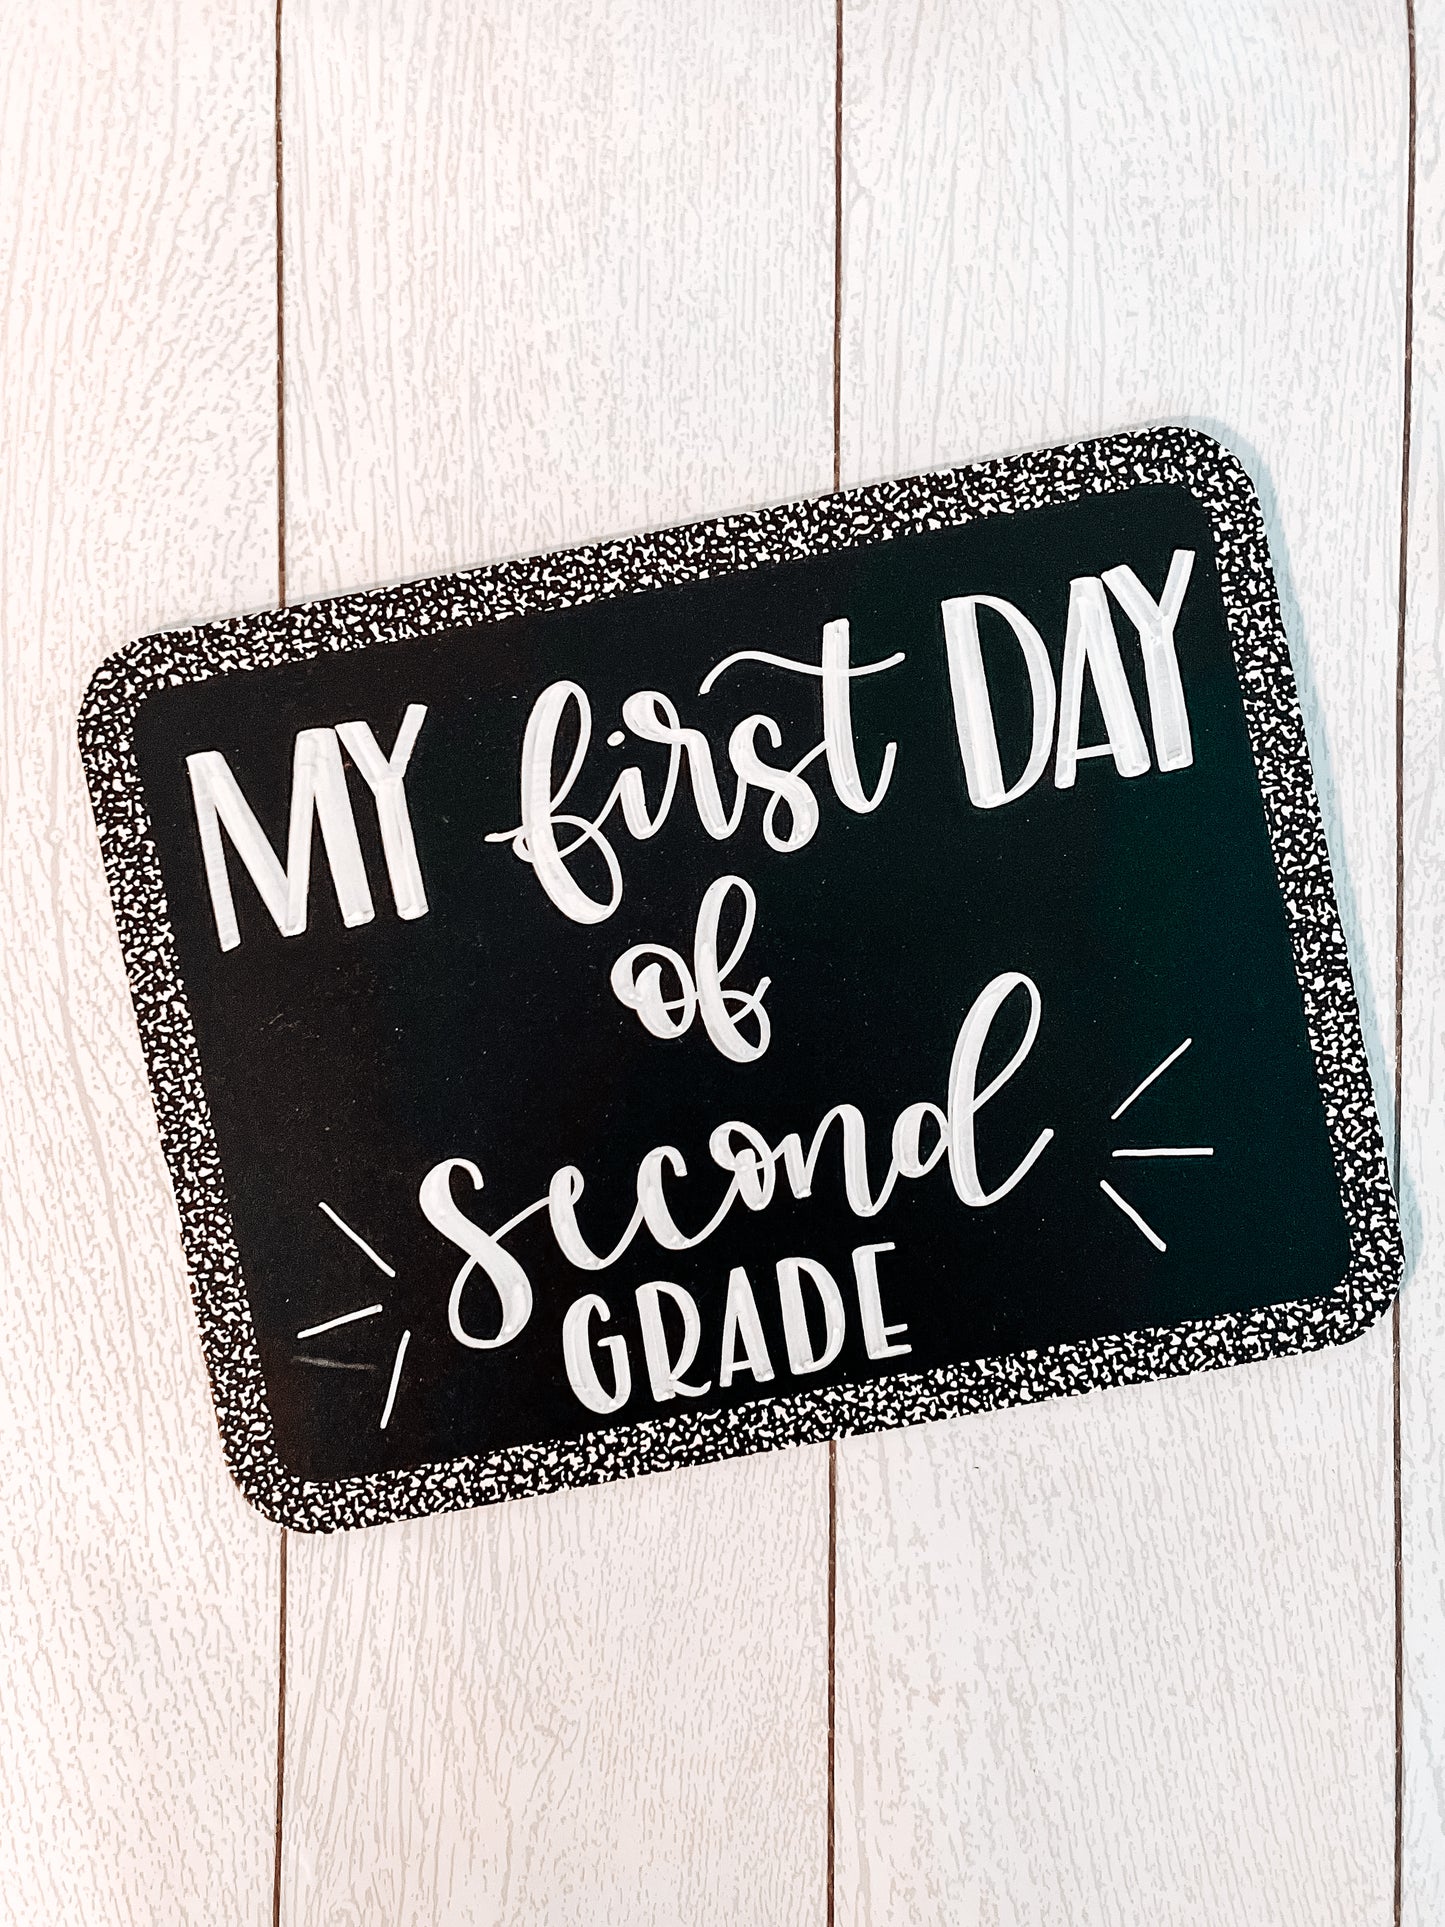 First/Last Day of School Chalkboard Sign